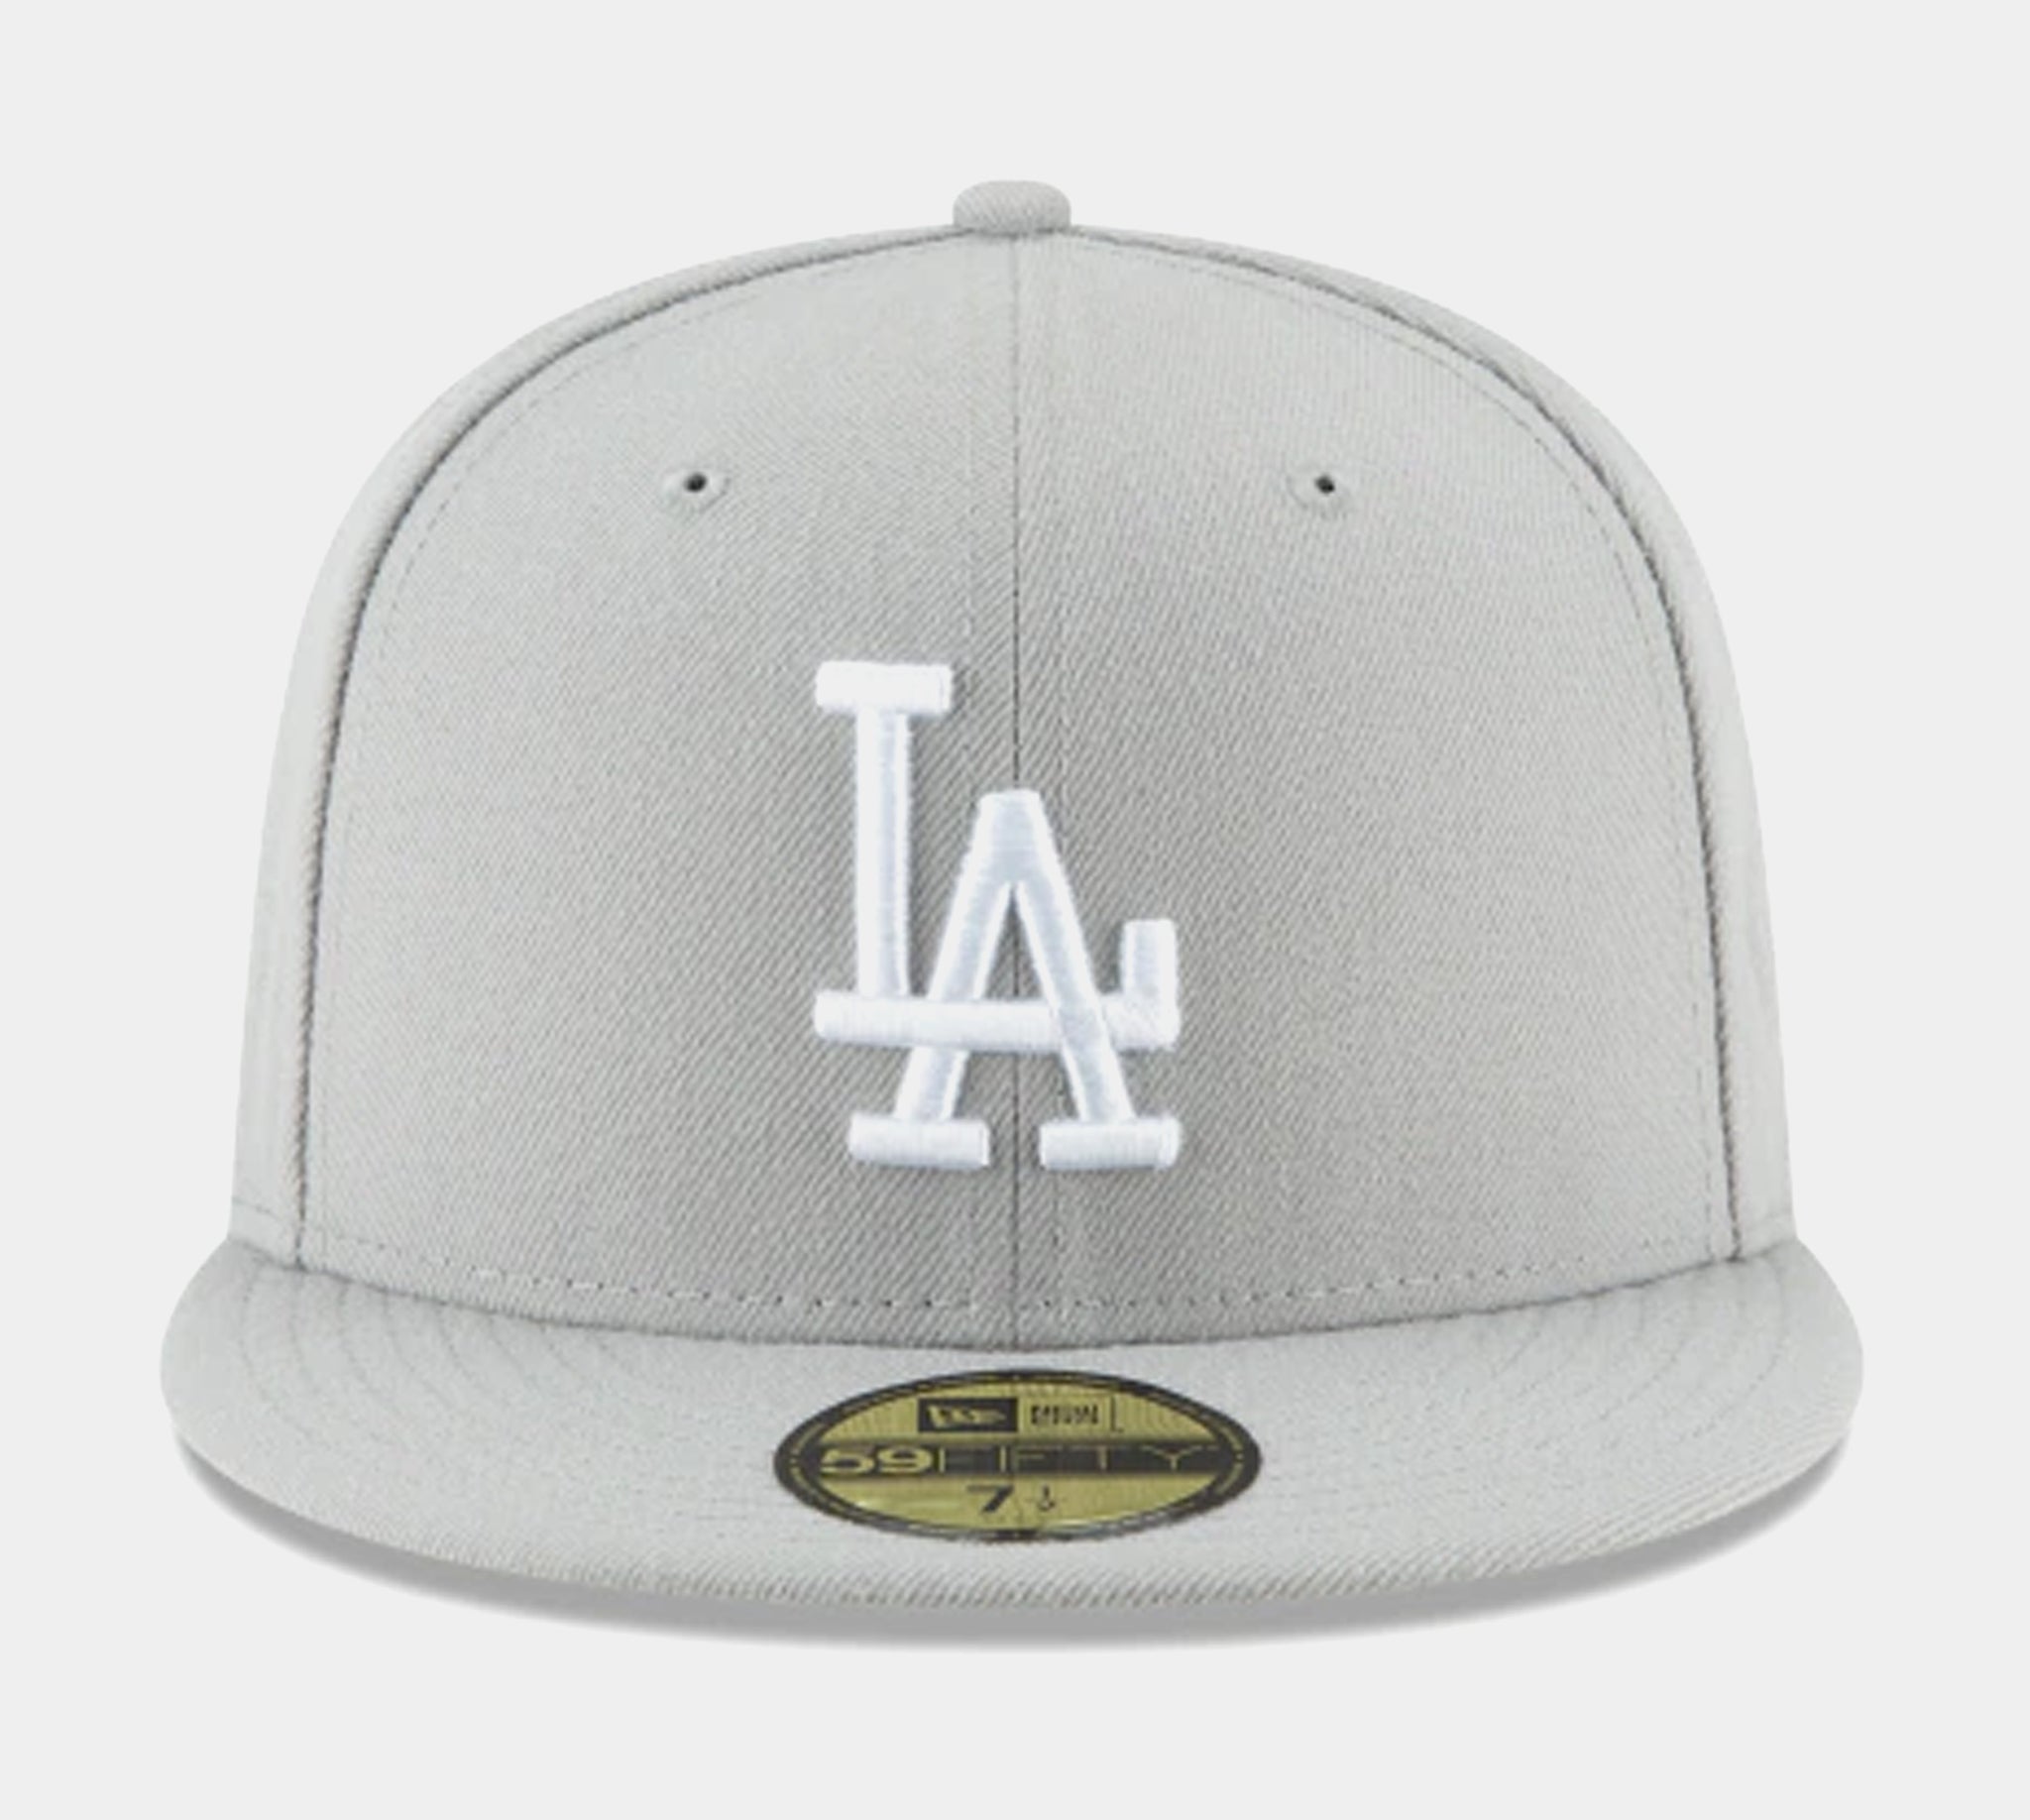 New Era Los Angeles Dodgers 59FIFTY Fitted Cap Mens Hat Grey 11591145 ...